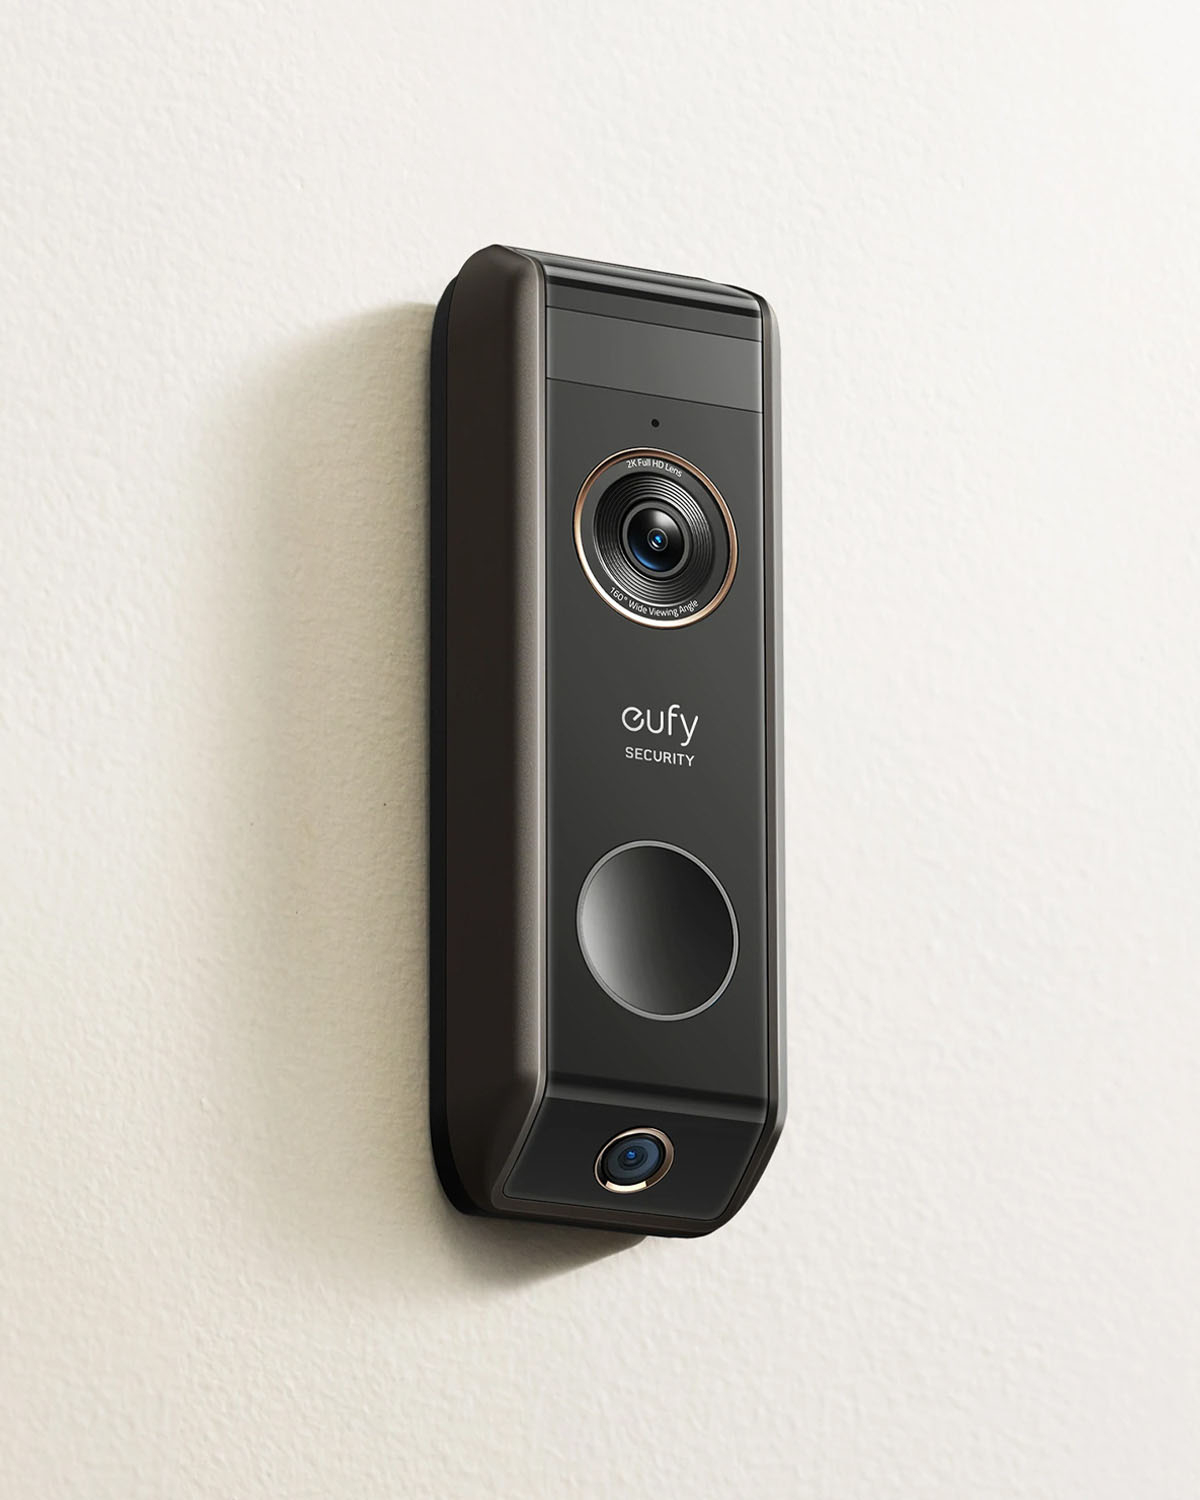 Eufy doorbell • Compare (24 products) see prices »